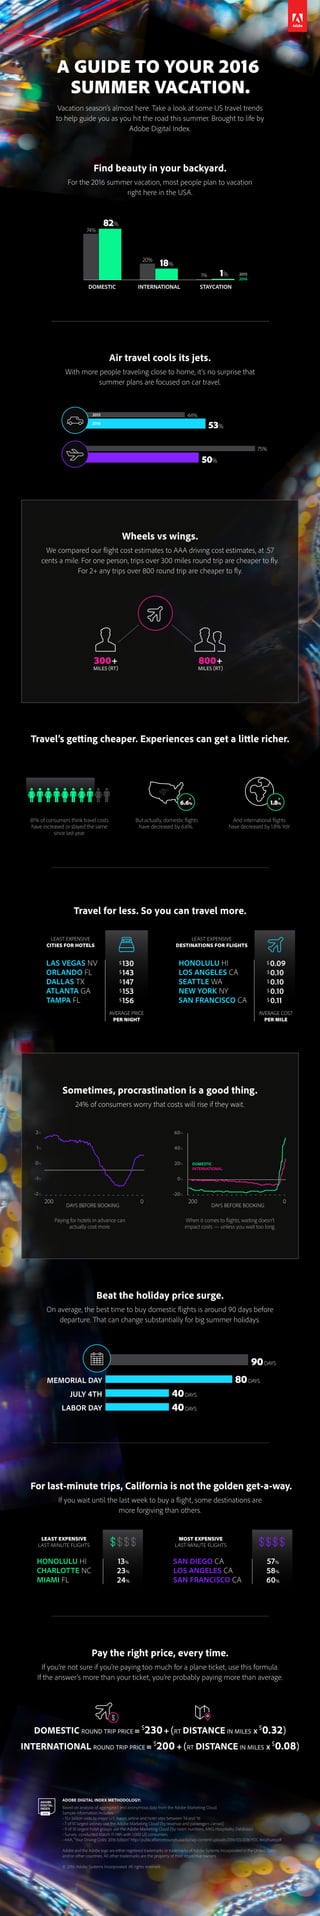 A GUIDE TO YOUR 2016
SUMMER VACATION.
Vacation season’s almost here. Take a look at some US travel trends
to help guide you as you hit the road this summer. Brought to life by
Adobe Digital Index.
81% of consumers think travel costs
have increased or stayed the same
since last year.
But actually, domestic flights
have decreased by 6.6%.
And international flights
have decreased by 1.8% YoY.
ADOBE DIGITAL INDEX METHODOLOGY:
Based on analysis of aggregated and anonymous data from the Adobe Marketing Cloud.
Sample information includes:
• 15+ billion visits to major U.S. travel, airline and hotel sites between ‘14 and ‘16
• 7 of 10 largest airlines use the Adobe Marketing Cloud (by revenue and passengers carried)
• 9 of 10 largest hotel groups use the Adobe Marketing Cloud (by room numbers, MKG Hospitality Database)
• Survey: conducted March 11-14th with 1,000 US consumers
• AAA, “Your Driving Costs: 2016 Edition” http://publicaffairsresources.aaa.biz/wp-content/uploads/2016/03/2016-YDC-Brochure.pdf
Adobe and the Adobe logo are either registered trademarks or trademarks of Adobe Systems Incorporated in the United States
and/or other countries. All other trademarks are the property of their respective owners.
© 2016 Adobe Systems Incorporated. All rights reserved.
With more people traveling close to home, it's no surprise that
summer plans are focused on car travel.
Air travel cools its jets.
For the 2016 summer vacation, most people plan to vacation
right here in the USA.
Find beauty in your backyard.
We compared our flight cost estimates to AAA driving cost estimates, at .57
cents a mile. For one person, trips over 300 miles round trip are cheaper to fly.
For 2+ any trips over 800 round trip are cheaper to fly.
Wheels vs wings.
Travel’s getting cheaper. Experiences can get a little richer.
24% of consumers worry that costs will rise if they wait.
Sometimes, procrastination is a good thing.
On average, the best time to buy domestic flights is around 90 days before
departure. That can change substantially for big summer holidays.
Beat the holiday price surge.
If you wait until the last week to buy a flight, some destinations are
more forgiving than others.
For last-minute trips, California is not the golden get-a-way.
If you’re not sure if you’re paying too much for a plane ticket, use this formula.
If the answer’s more than your ticket, you’re probably paying more than average.
Pay the right price, every time.
DOMESTIC ROUND TRIP PRICE = $
230+ (RT DISTANCE IN MILES X
$
0.32)
INTERNATIONAL ROUND TRIP PRICE = $
200 + (RT DISTANCE IN MILES X
$
0.08)
Travel for less. So you can travel more.
200 0200 0
60%
40%
20%
0%
-20%
2%
1%
0%
-1%
-2%
DOMESTIC
INTERNATIONAL
Paying for hotels in advance can
actually cost more.
When it comes to flights, waiting doesn’t
impact costs — unless you wait too long.
INTERNATIONALDOMESTIC STAYCATION
2015
2016
LEAST EXPENSIVE
CITIES FOR HOTELS
AVERAGE PRICE
PER NIGHT
300+
MILES (RT)
800+
MILES (RT)
AVERAGE COST
PER MILE
LEAST EXPENSIVE
DESTINATIONS FOR FLIGHTS
LAS VEGAS NV
ORLANDO FL
DALLAS TX
ATLANTA GA
TAMPA FL
HONOLULU HI
LOS ANGELES CA
SEATTLE WA
NEW YORK NY
SAN FRANCISCO CA
$ 130
$ 143
$ 147
$ 153
$ 156
$ 0.09
$ 0.10
$ 0.10
$ 0.10
$ 0.11
1.8%
HONOLULU HI
CHARLOTTE NC
MIAMI FL
13%
23%
24%
57%
58%
60%
SAN DIEGO CA
LOS ANGELES CA
SAN FRANCISCO CA
LEAST EXPENSIVE
LAST-MINUTE FLIGHTS
MOST EXPENSIVE
LAST-MINUTE FLIGHTS
6.6%
53%
82%
44%
74%
18%
20%
1%1%
75%
50%
2015
2016
MEMORIAL DAY
JULY 4TH
LABOR DAY
90DAYS
80DAYS
40DAYS
40DAYS
DAYS BEFORE BOOKING DAYS BEFORE BOOKING
 